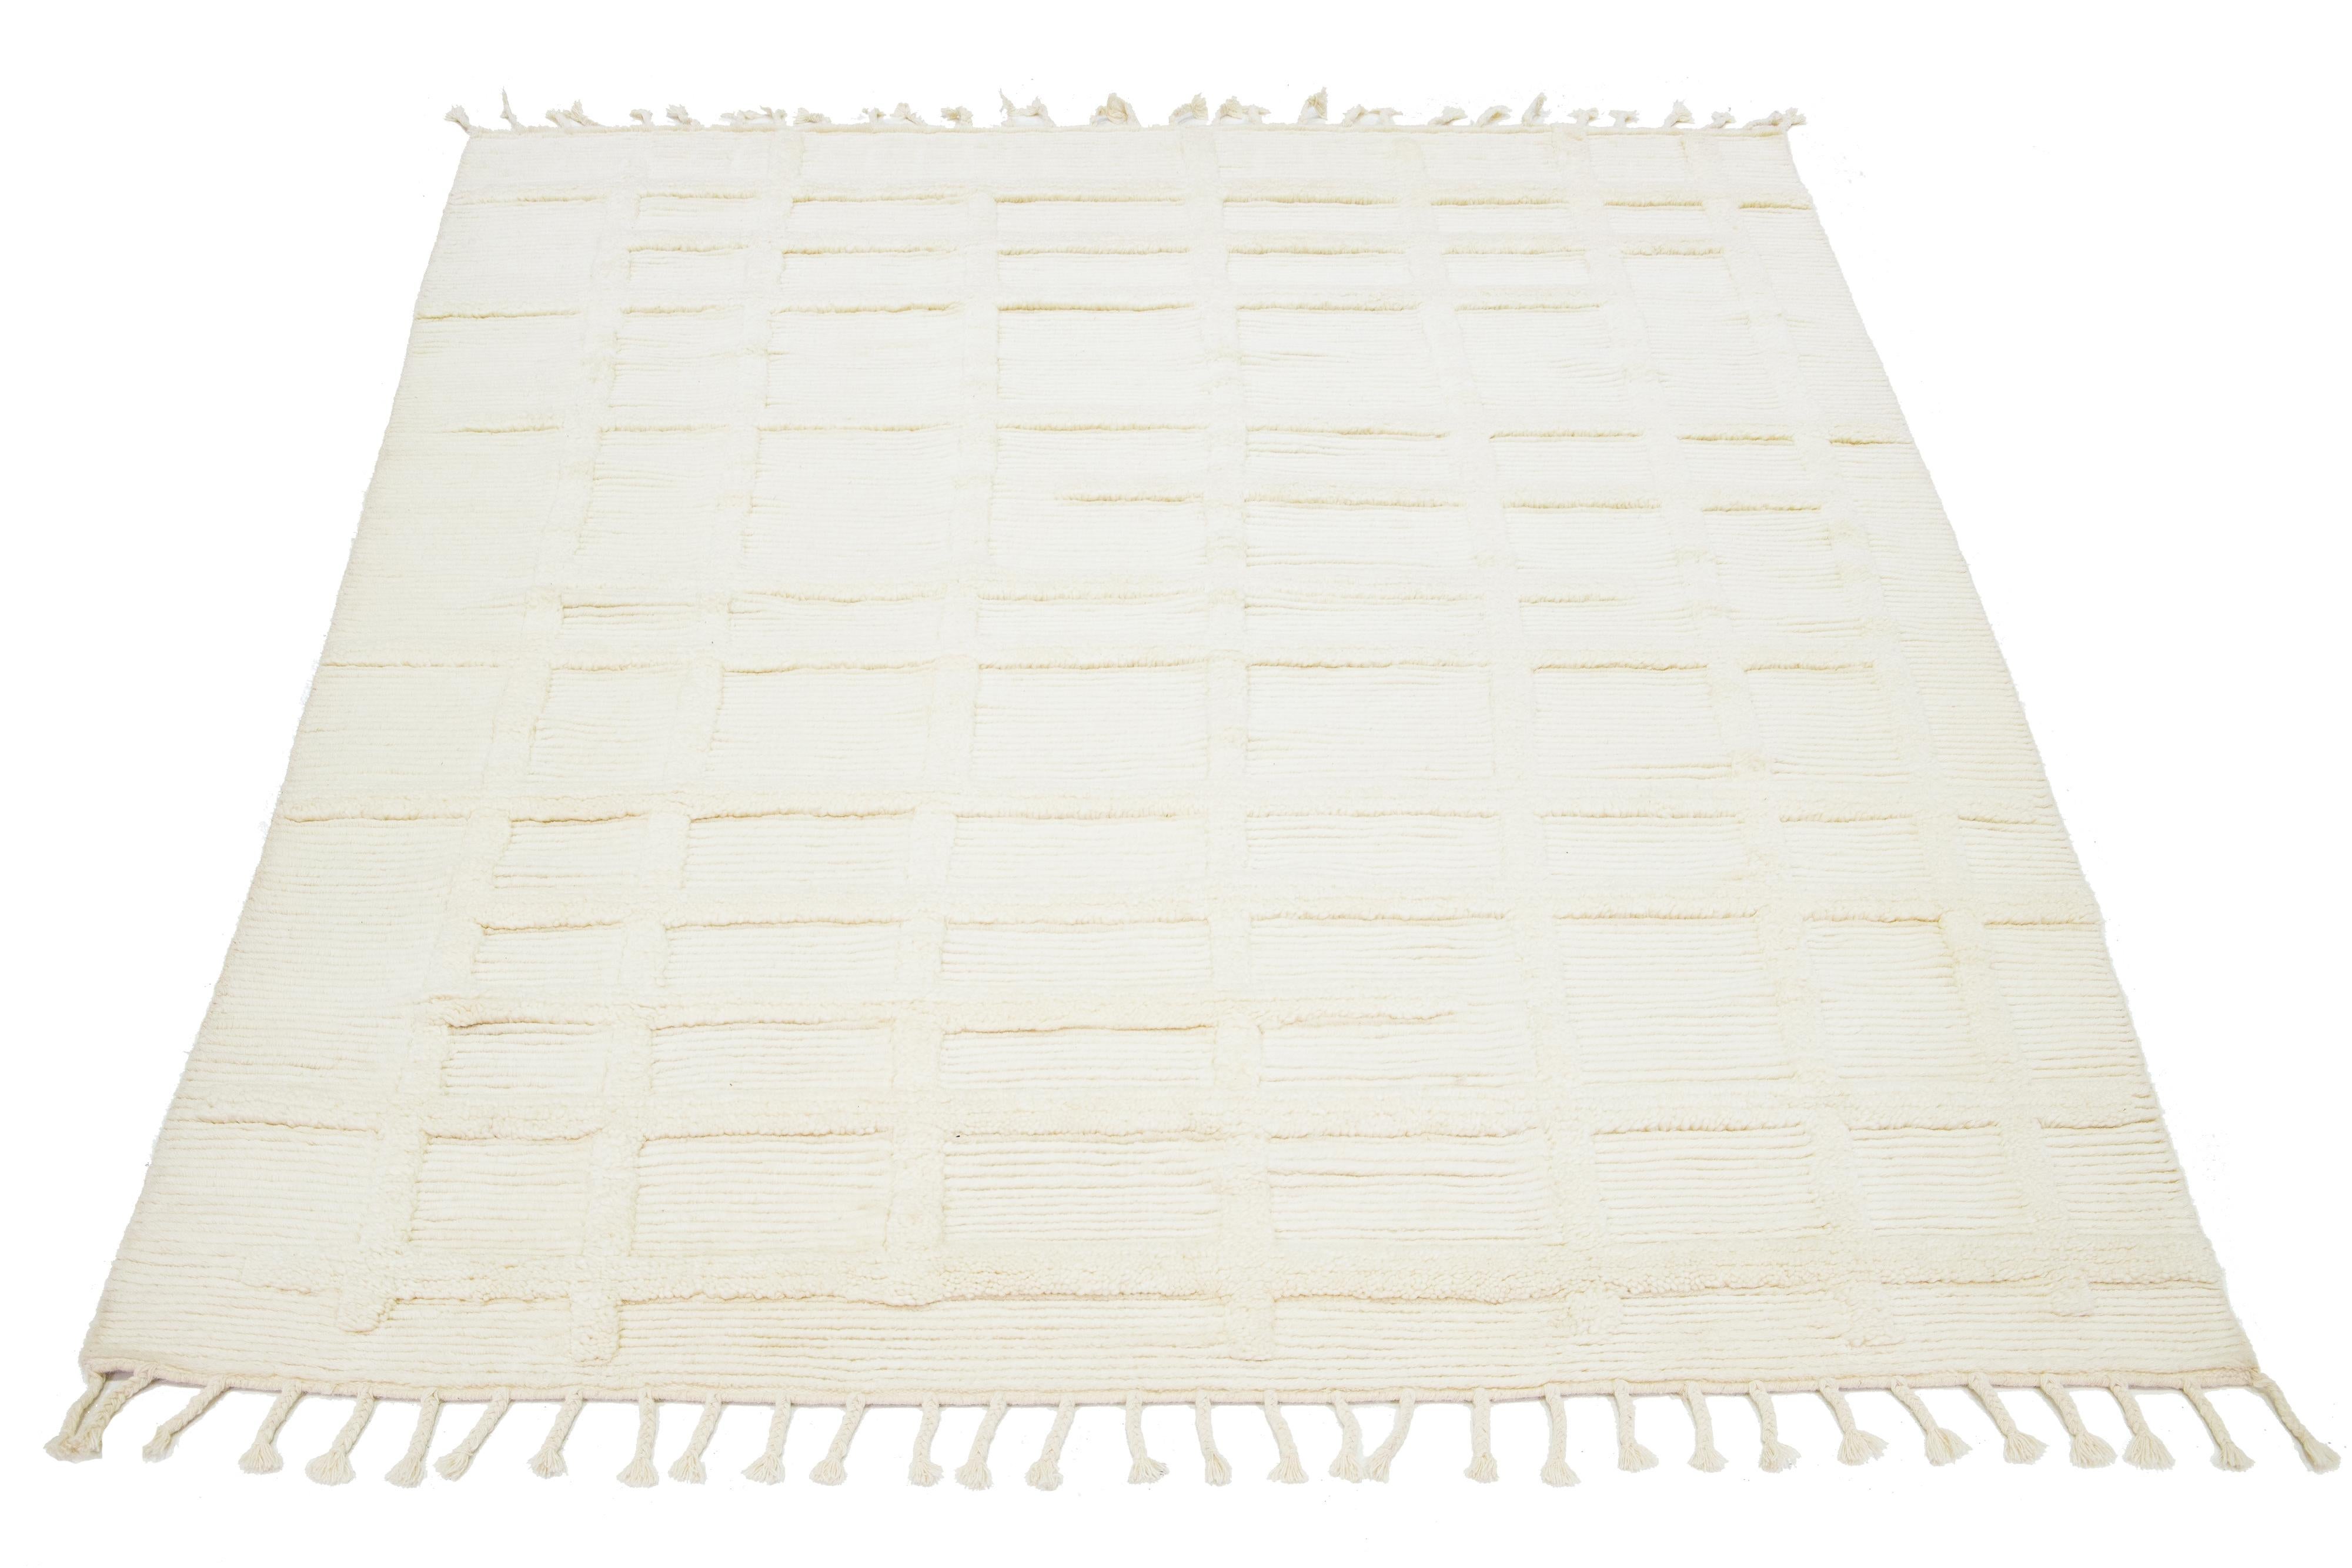 This contemporary Moroccan wool rug is expertly hand-made and showcases a minimalist ivory design.

This rug measures 7'10